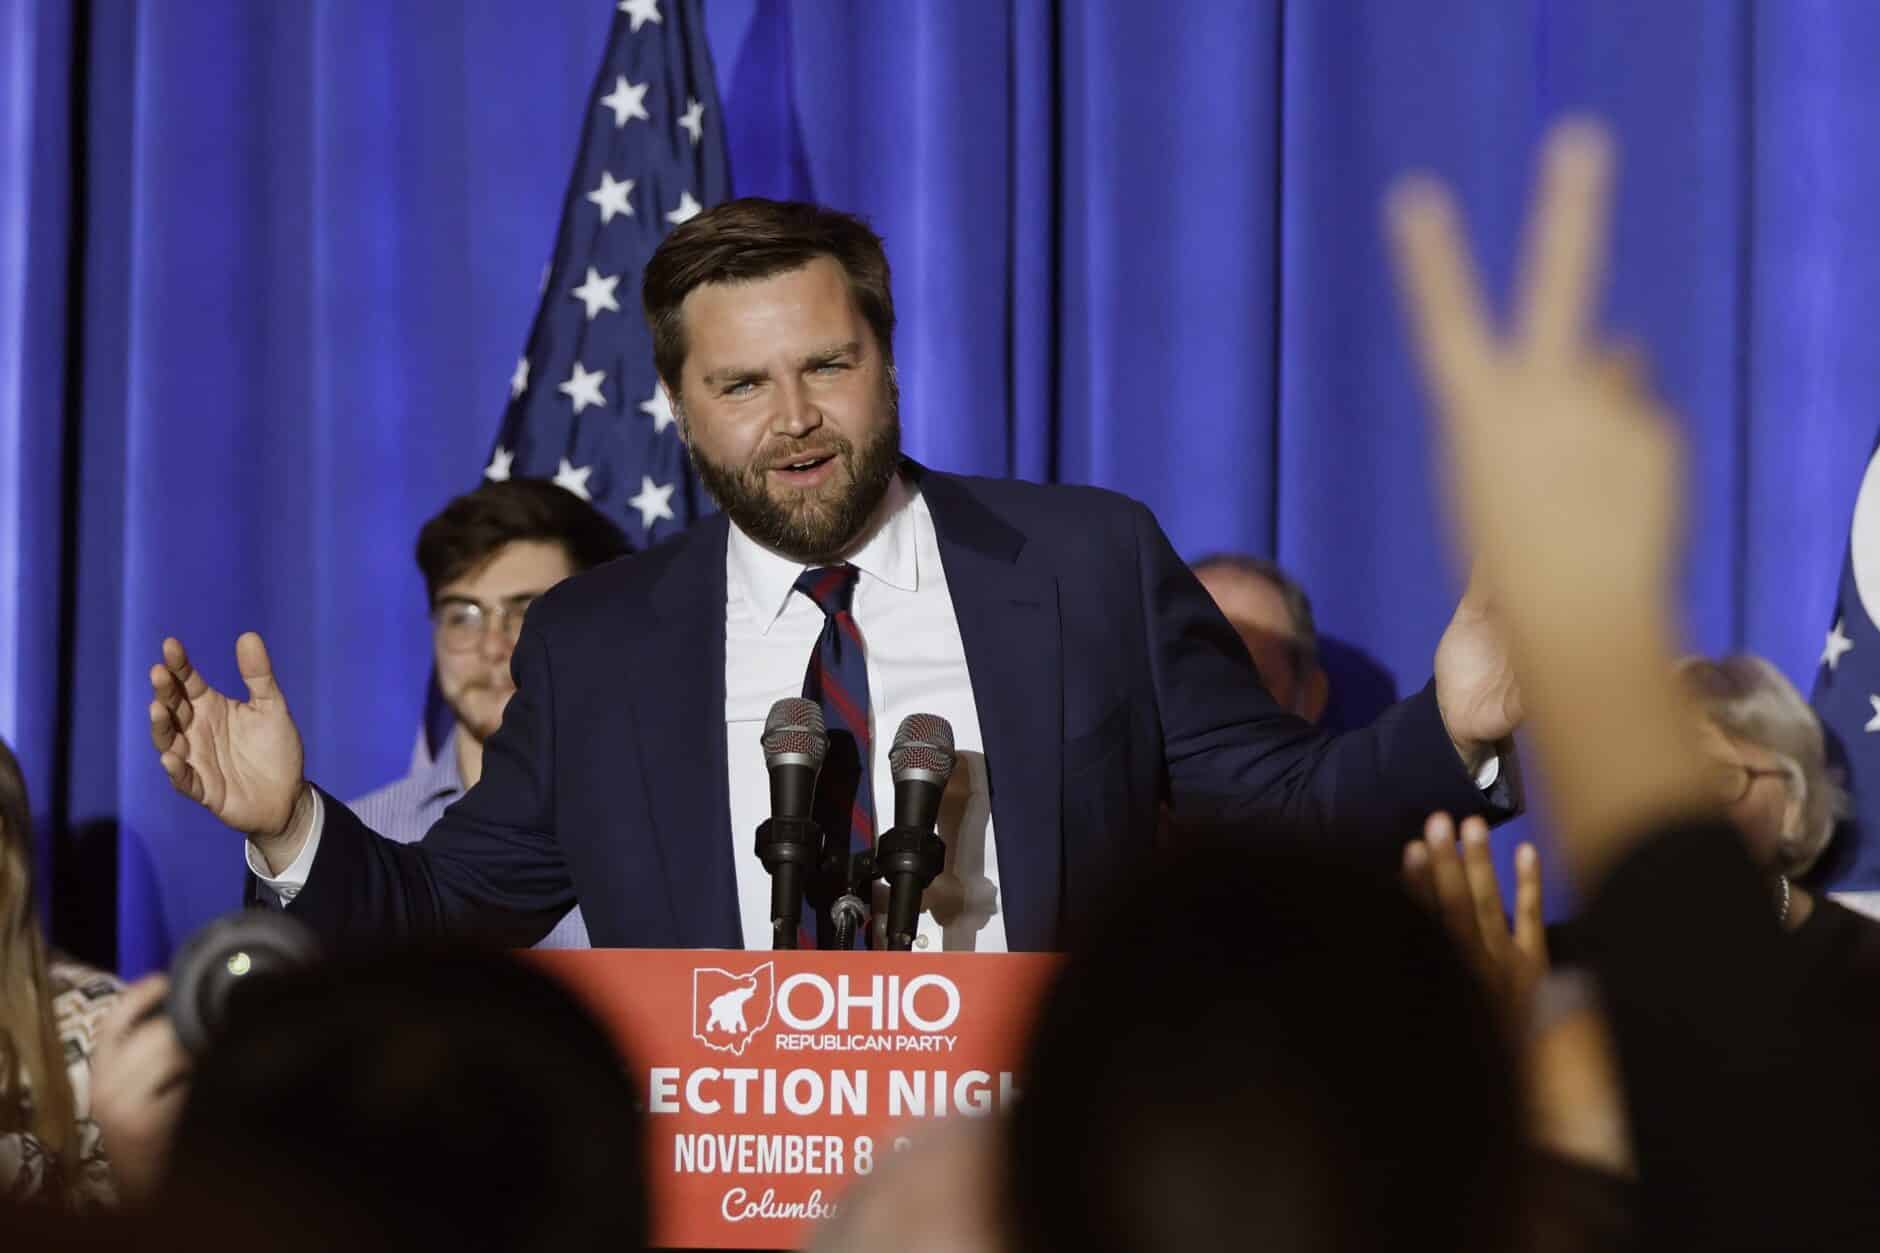 Keeping Ohio red, Republican Vance wins US Senate race Courthouse